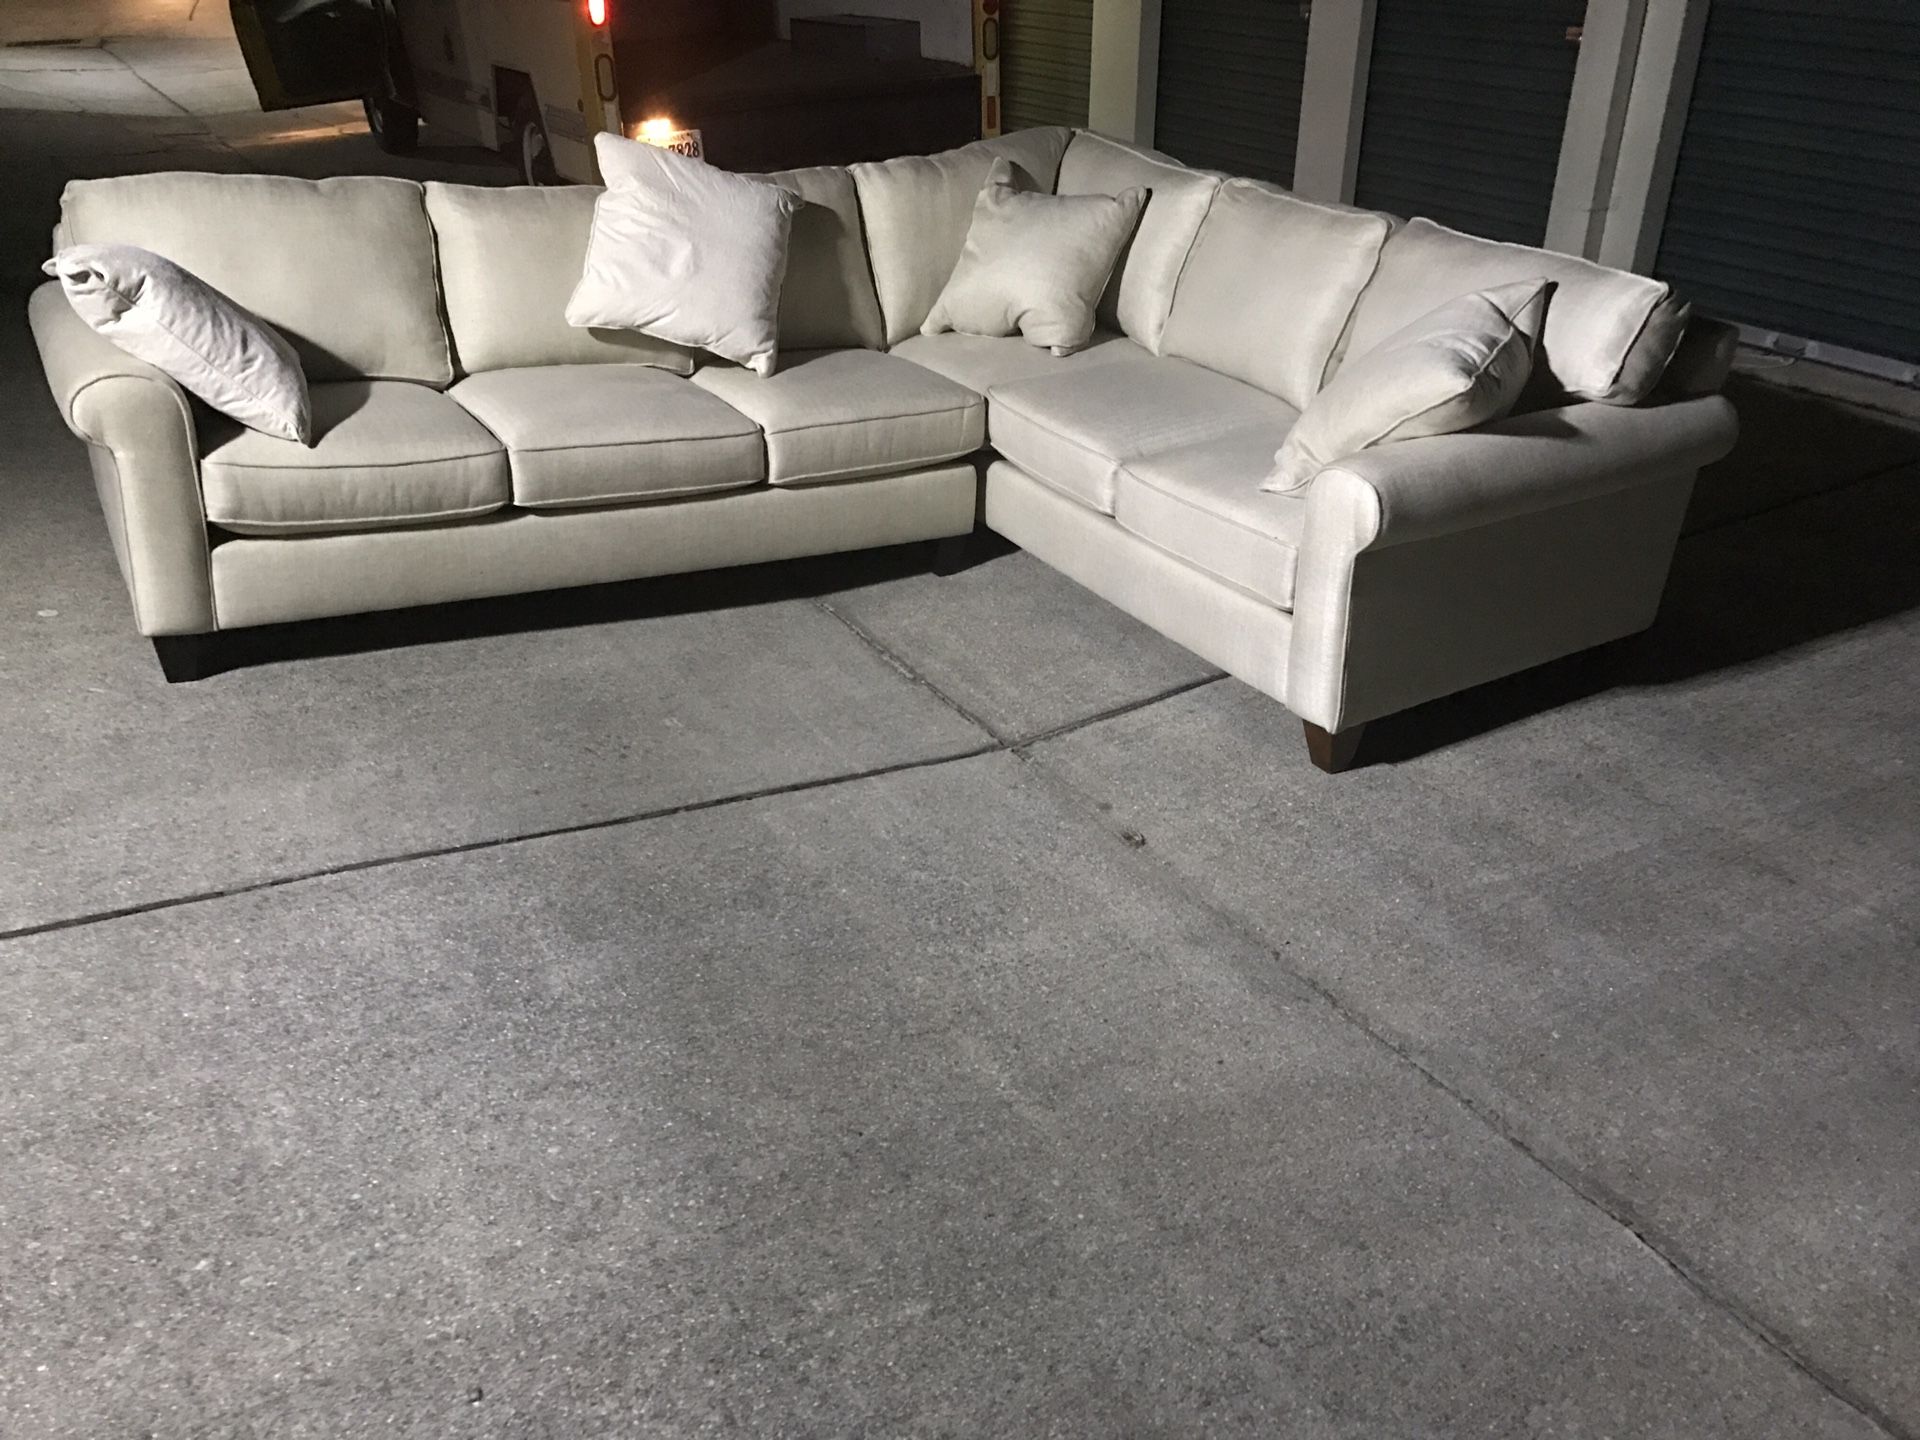 Brand new Caci sectional couch